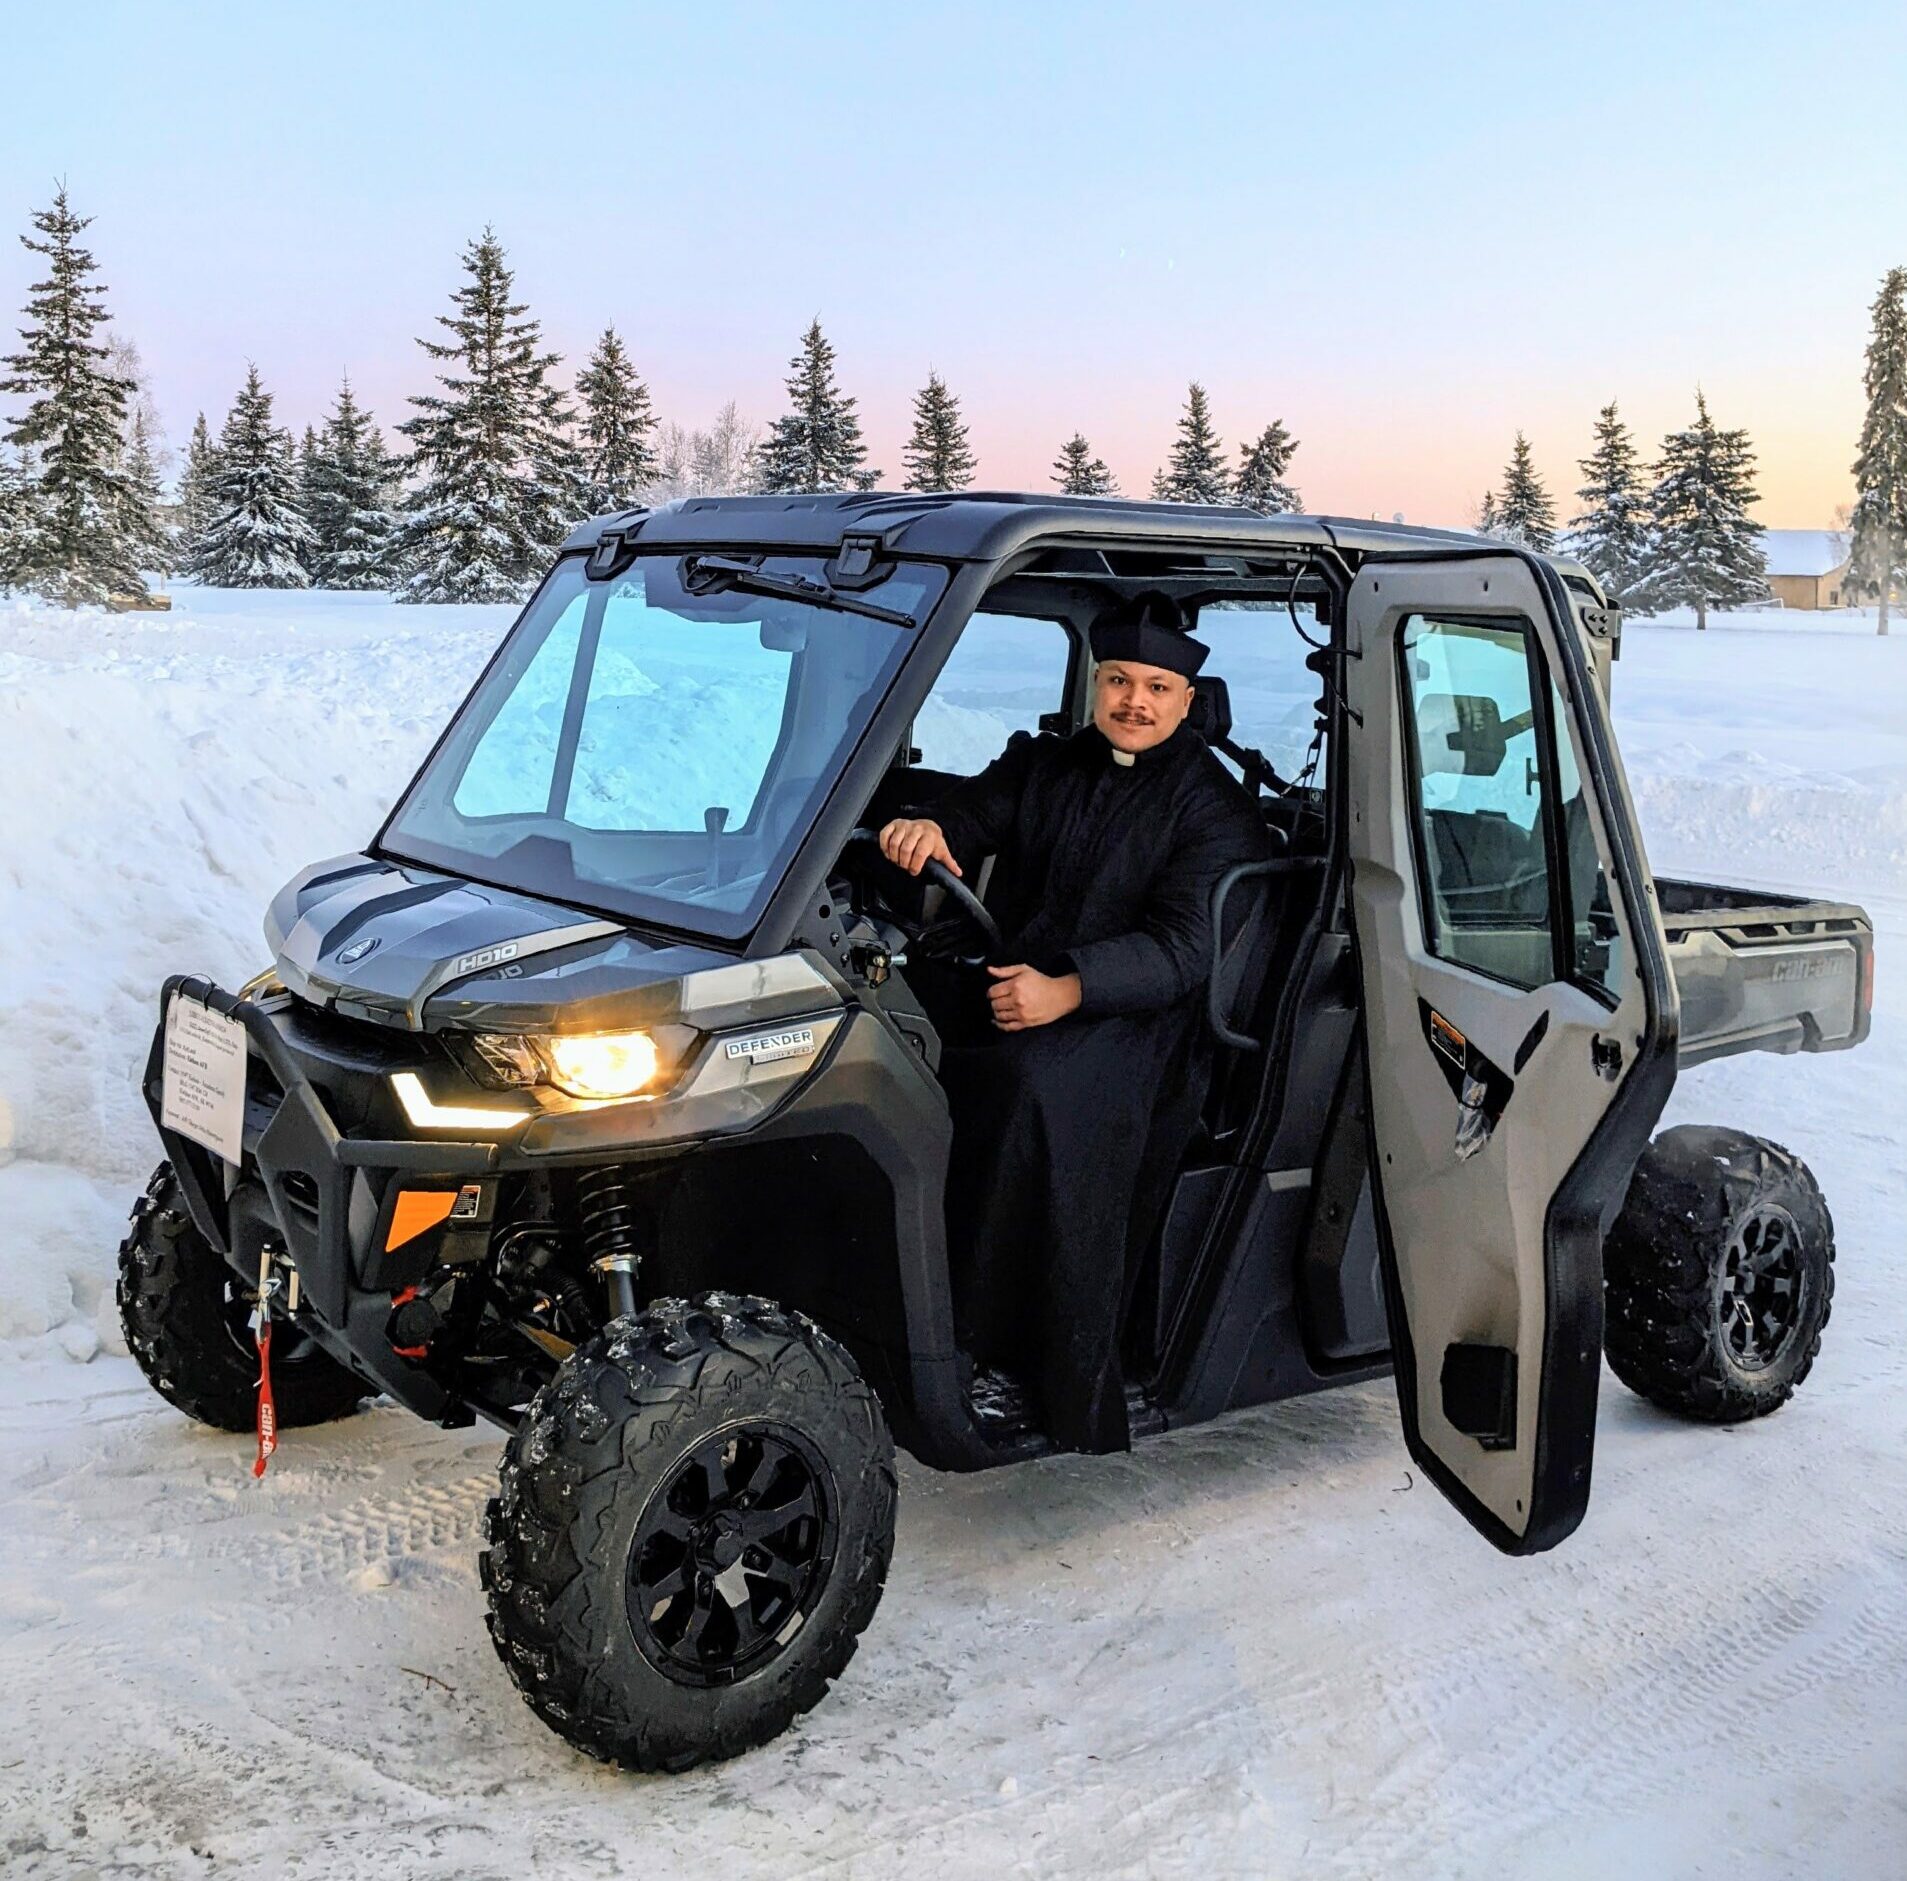 Chaplain Amadeus Gandy driving to Mass in -40 degrees.